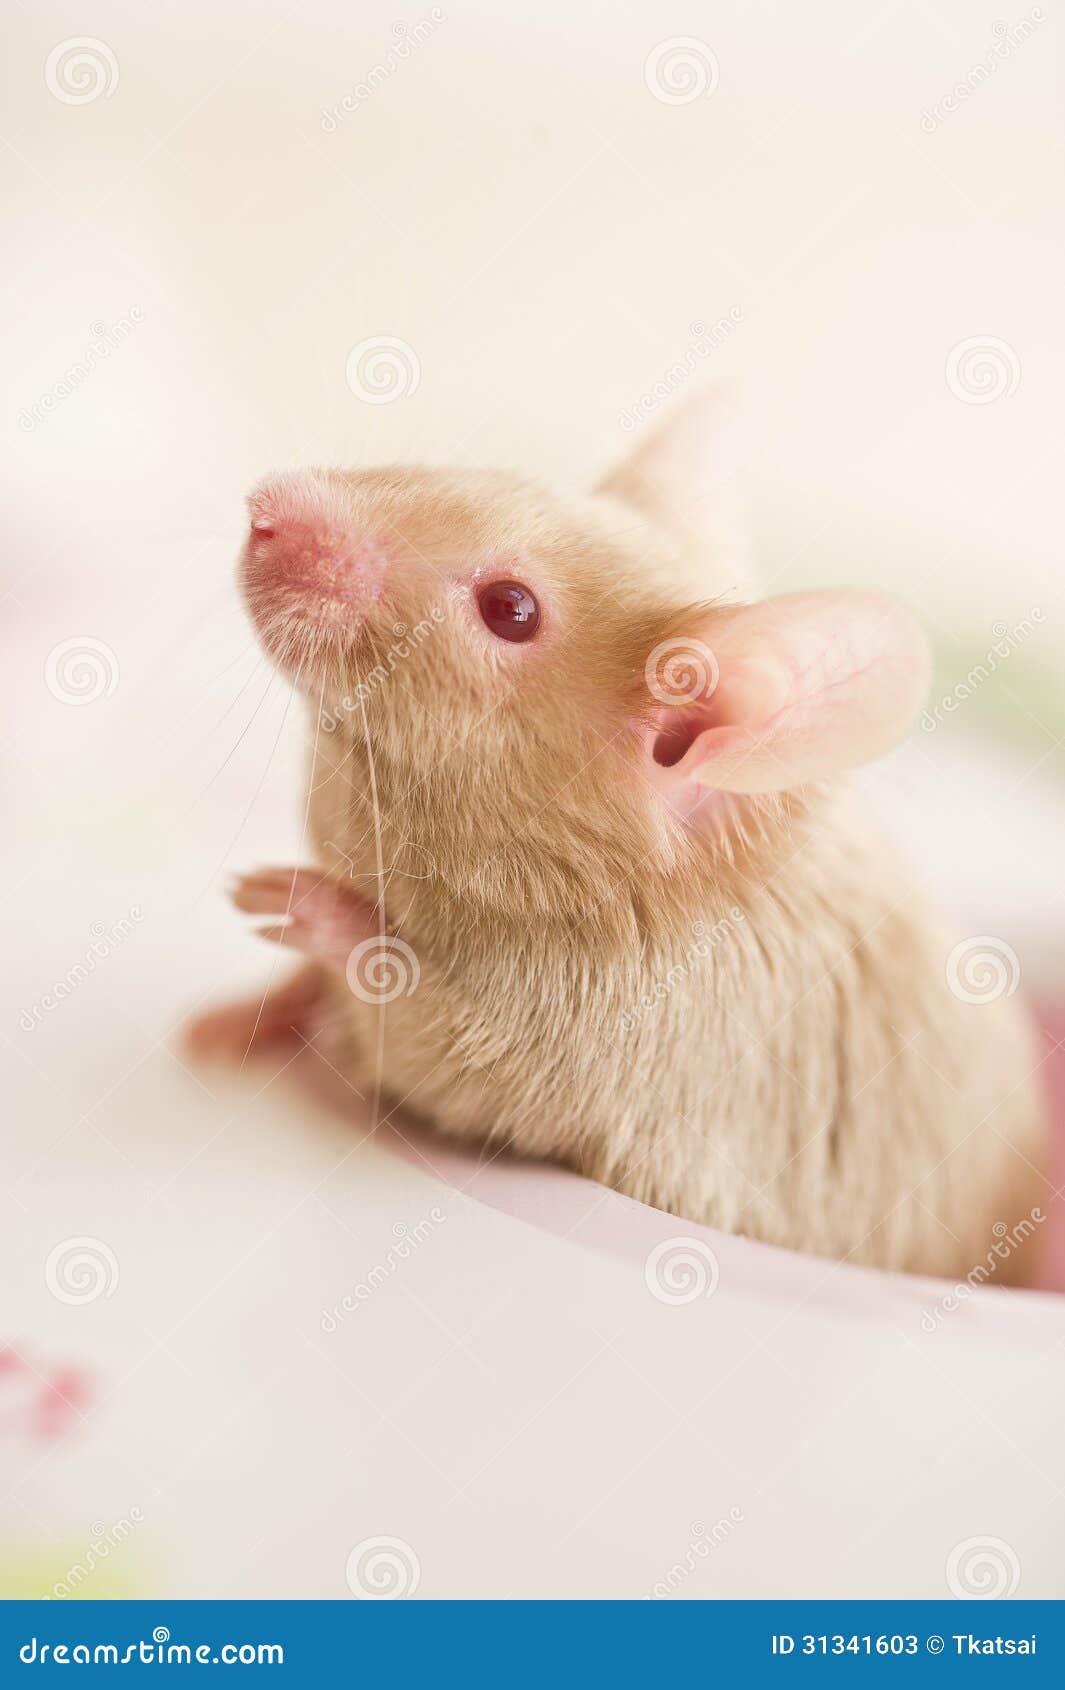 cute mouse rat rodent looking out of the window